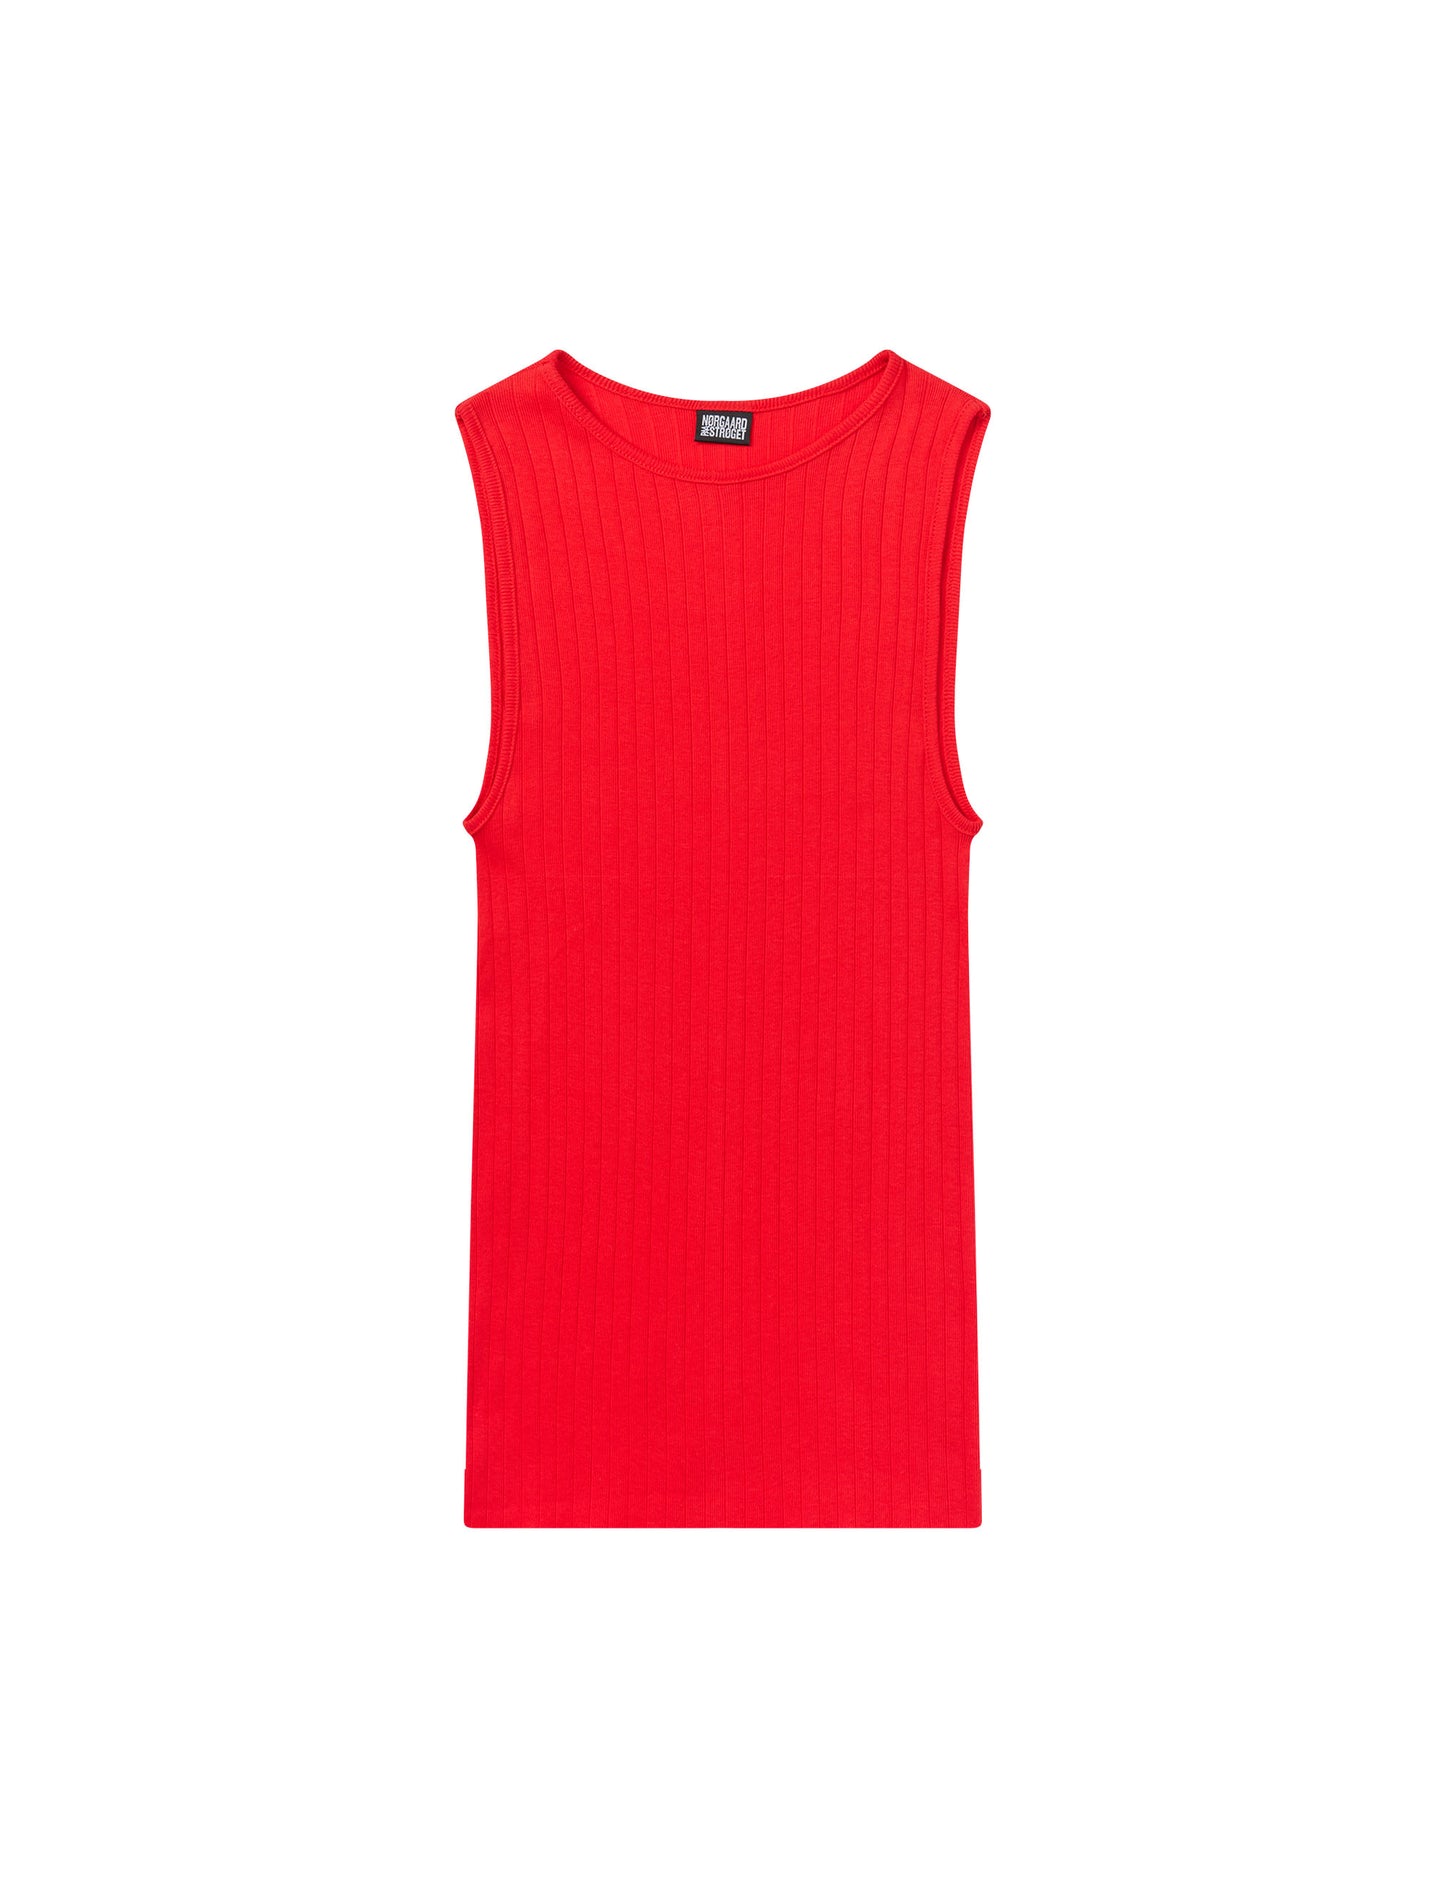 NPS Tank Top Solid Color, Red